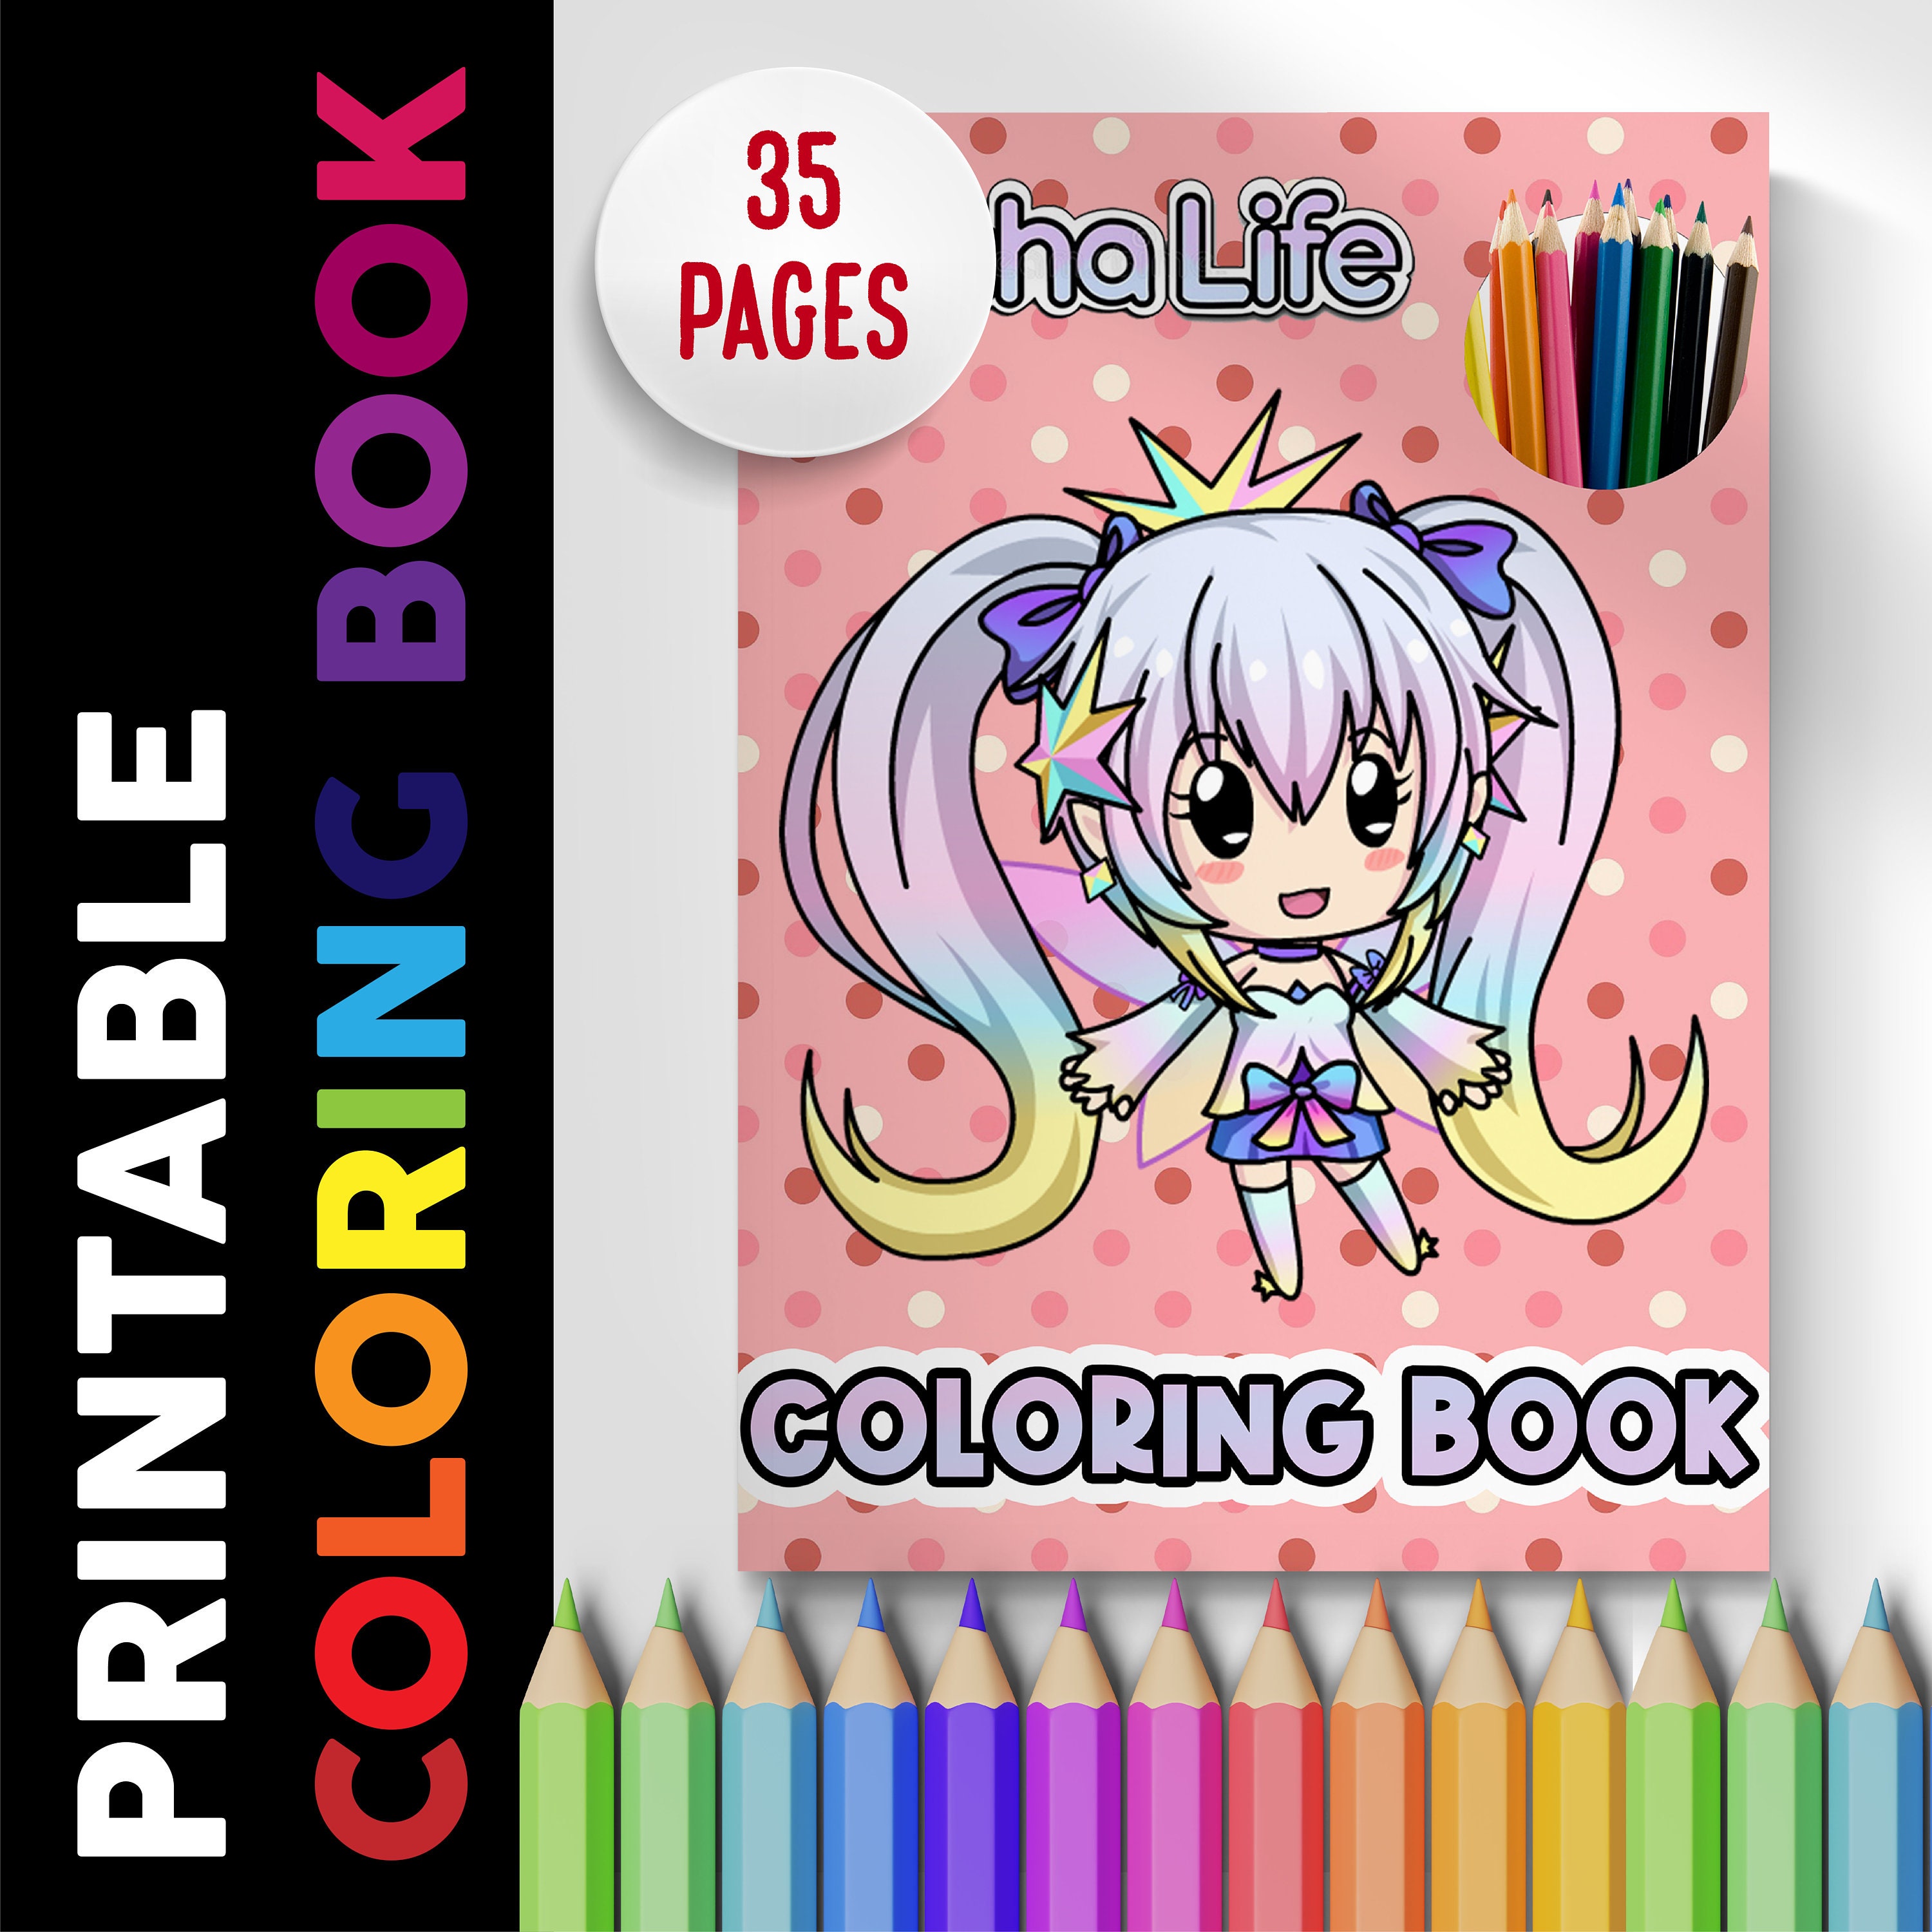 Gacha Life Coloring Book for All Ages - Microsoft Apps